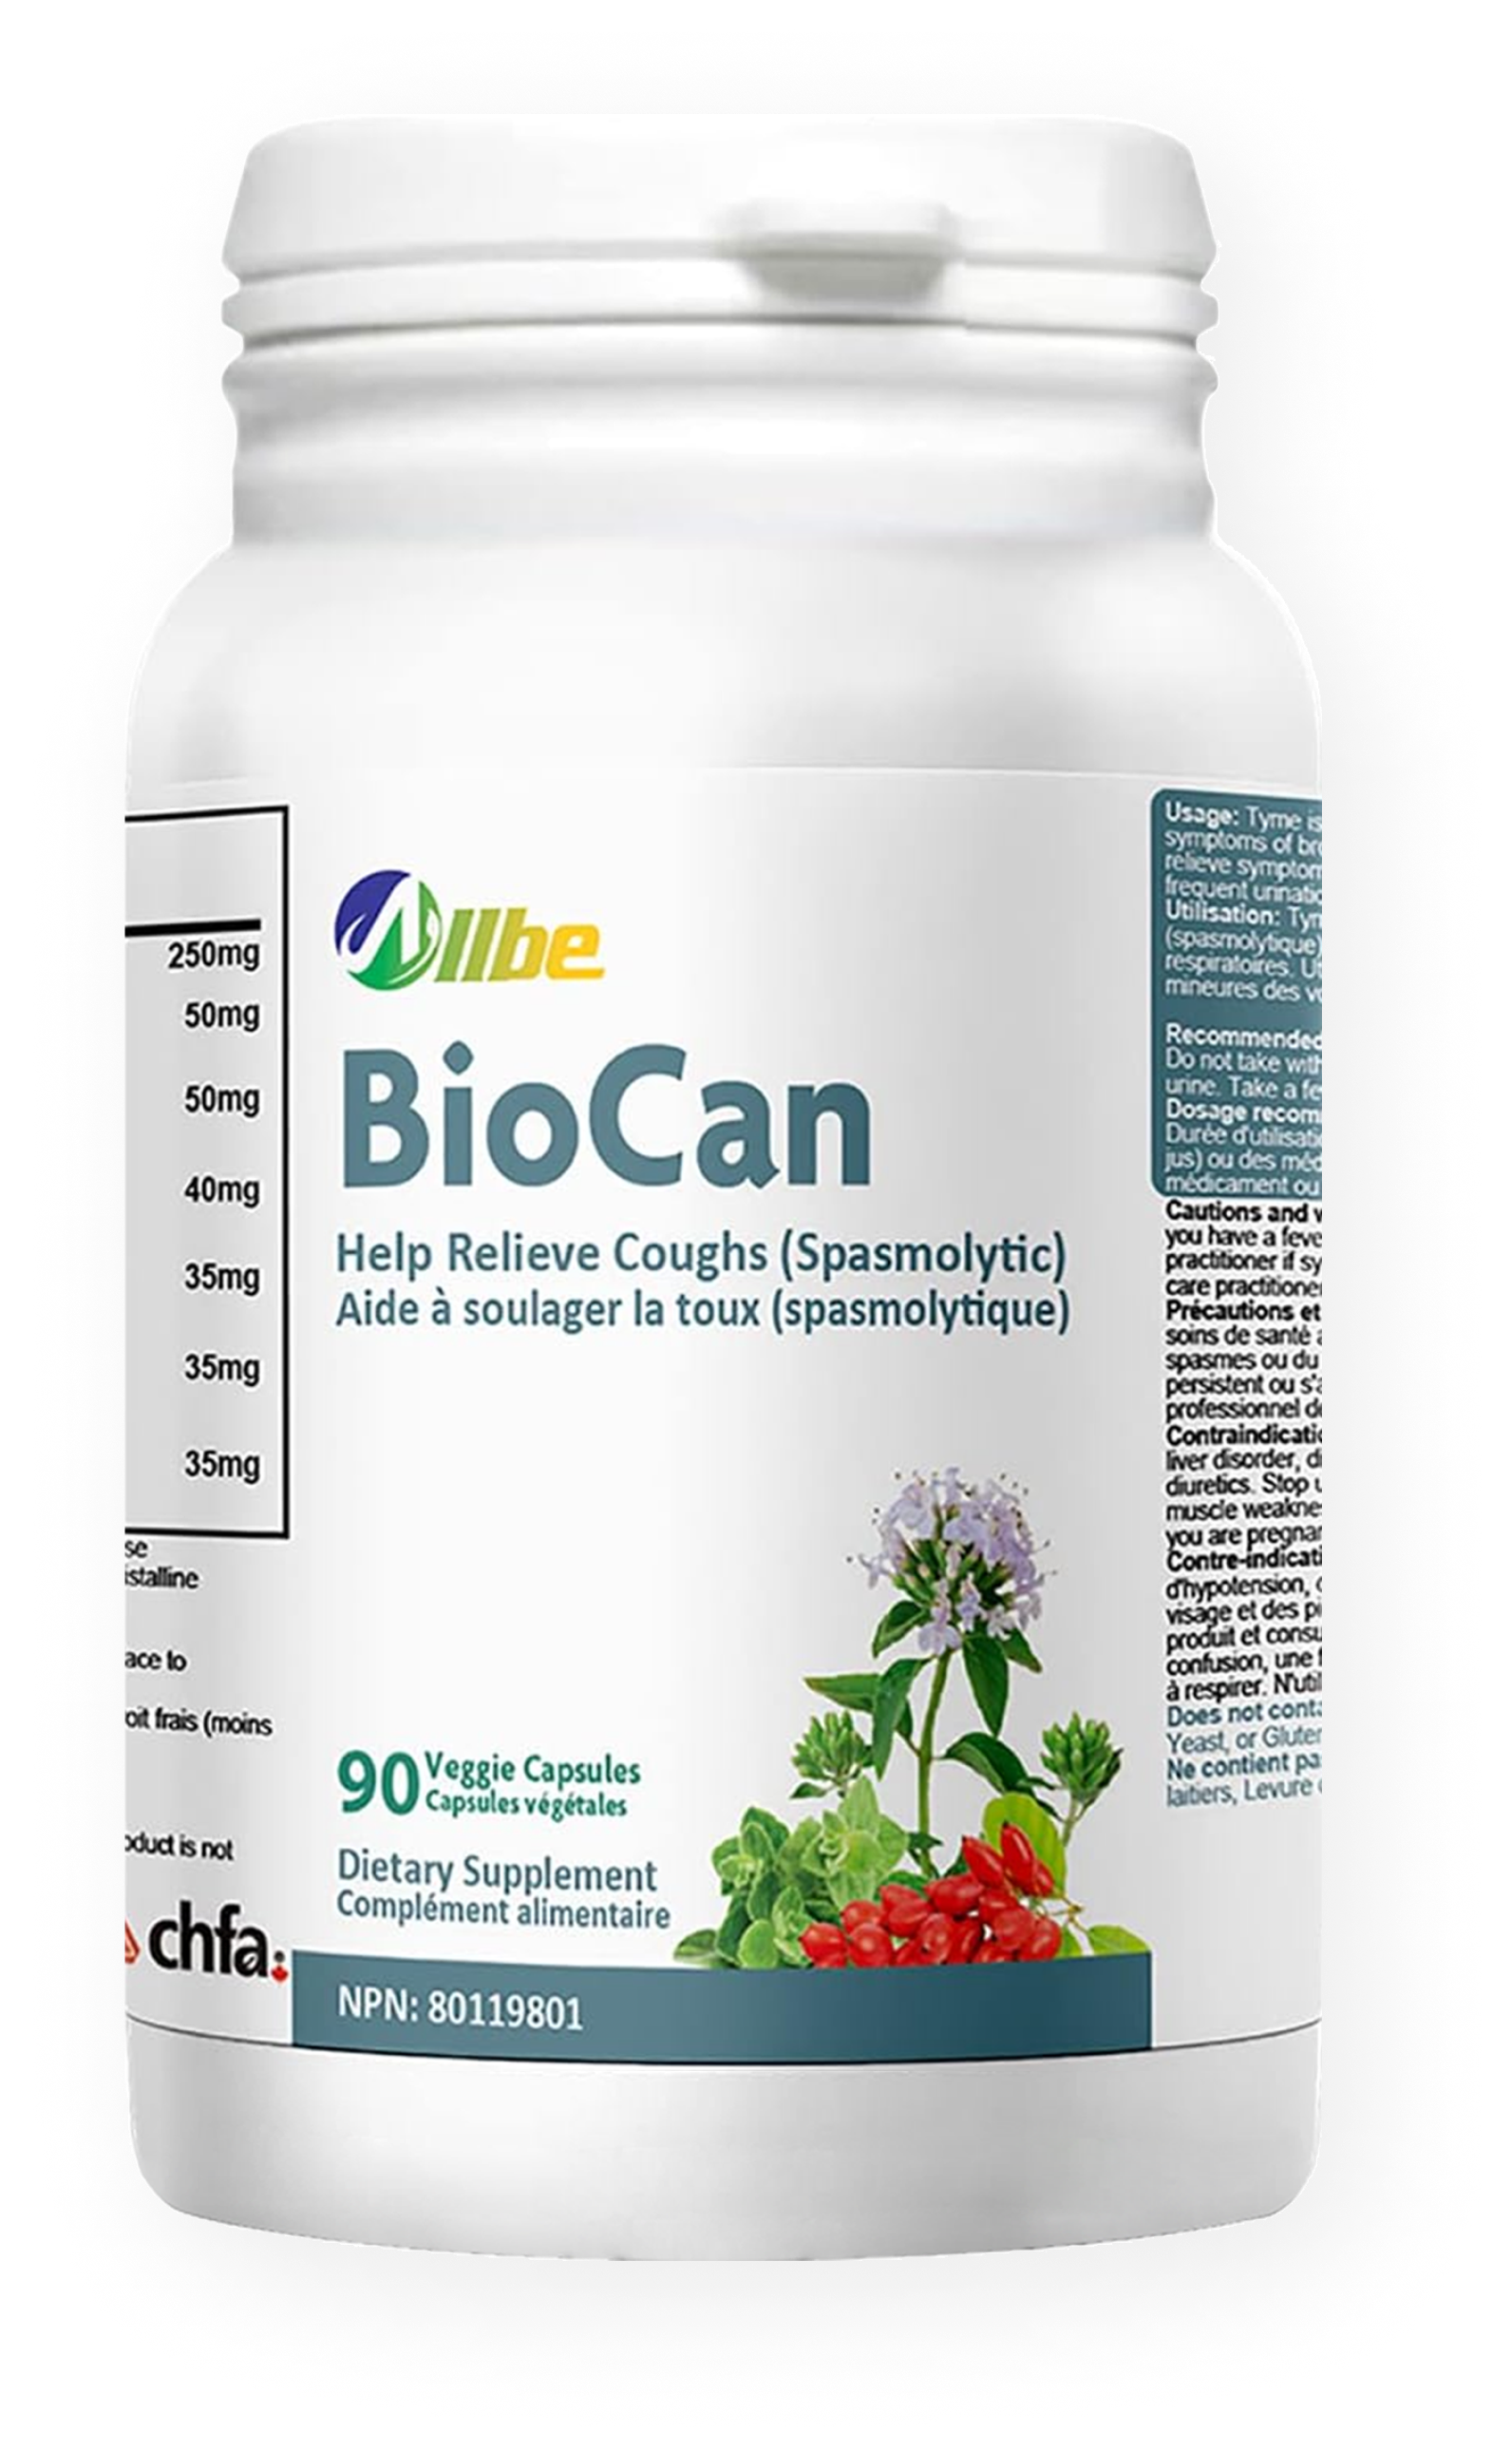 Biocan capsules for cough relief